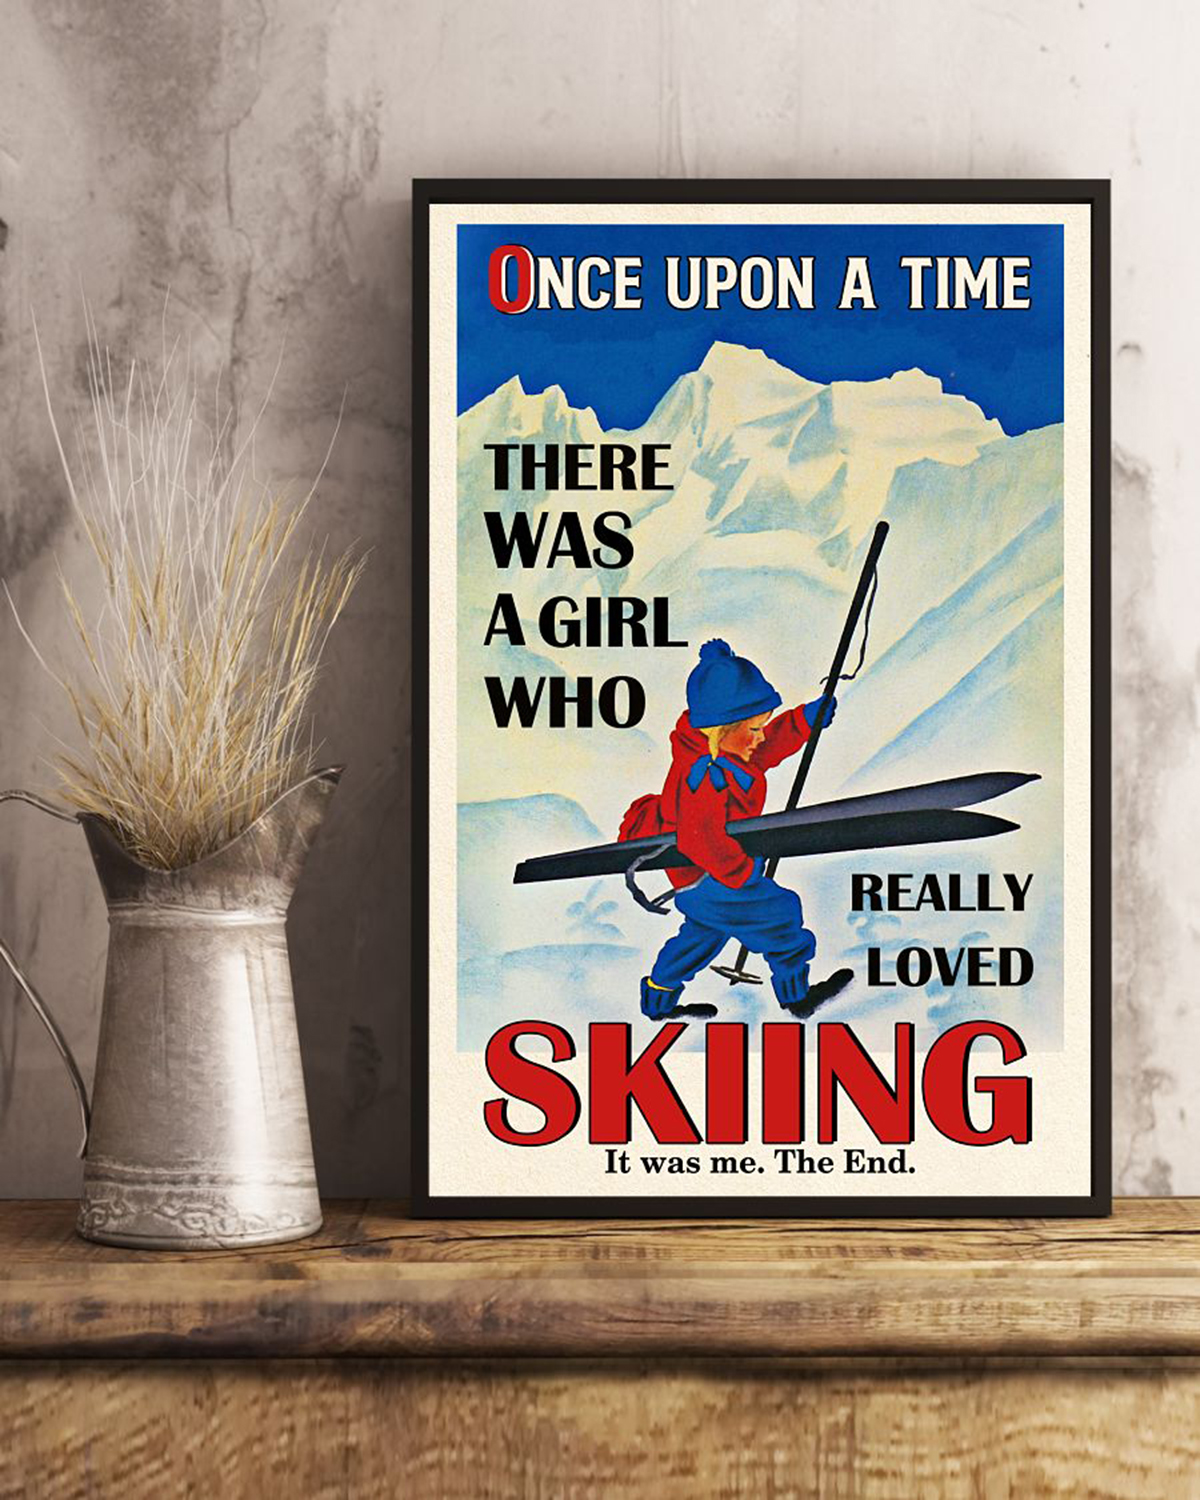 Once upon a time there was a girl who really loved skiing canvas prints